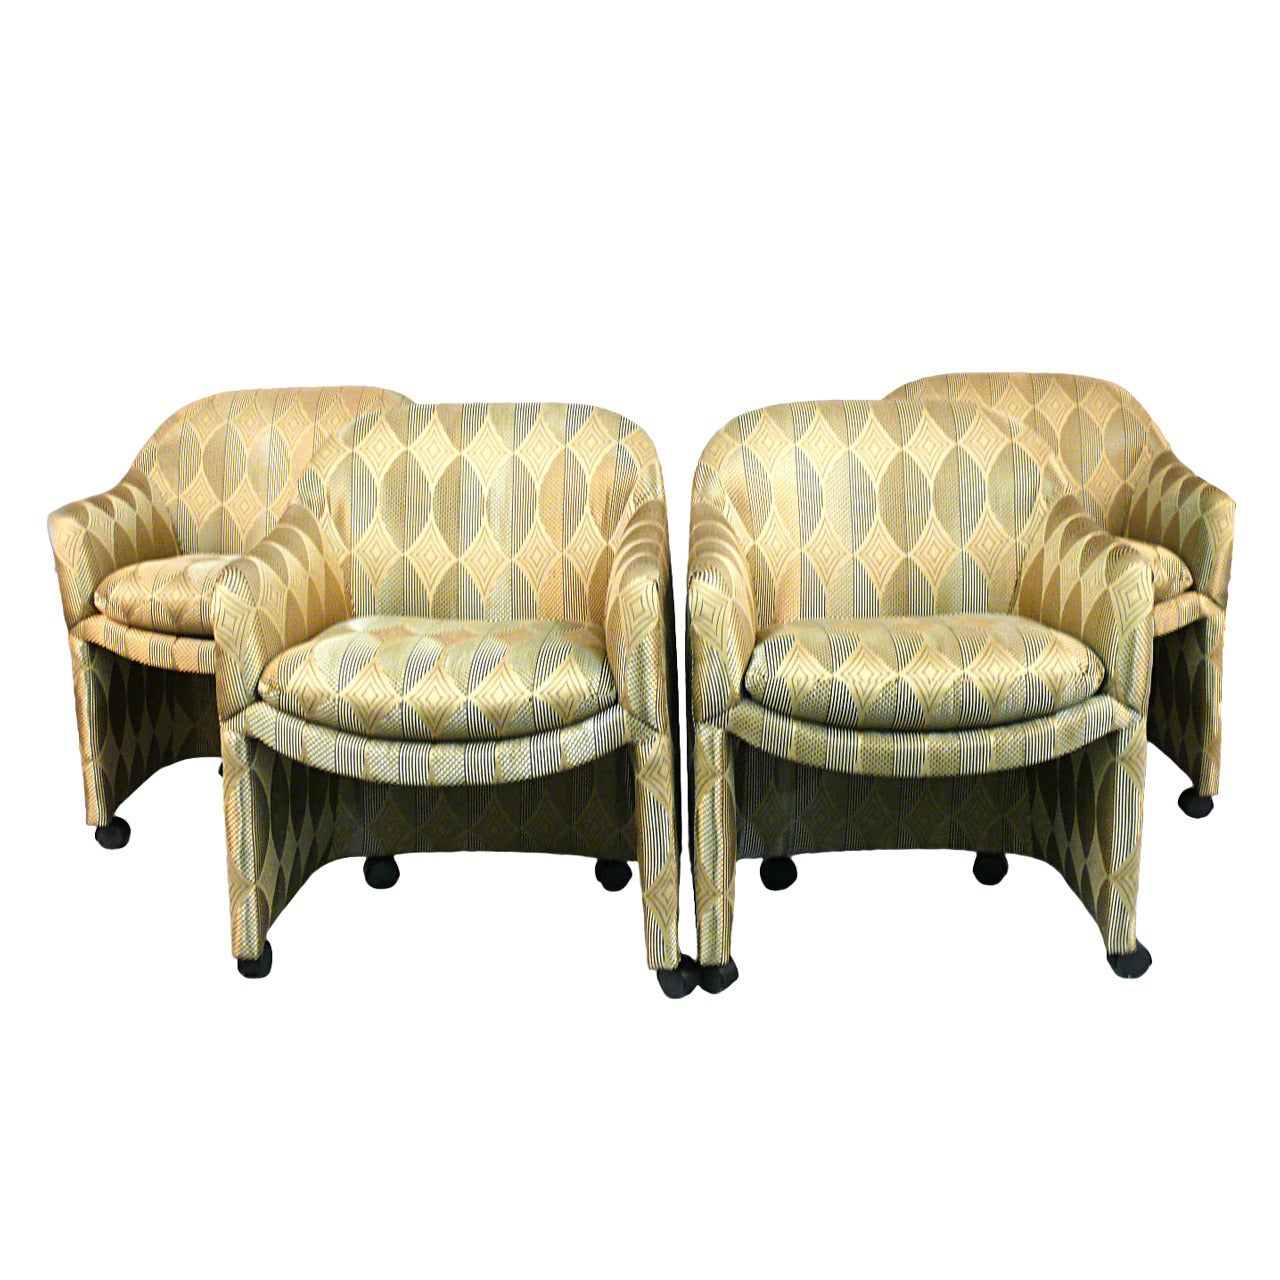 Outstanding Set of Four Milo Baughman for Thayer Coggin Barrel Chairs on Casters For Sale